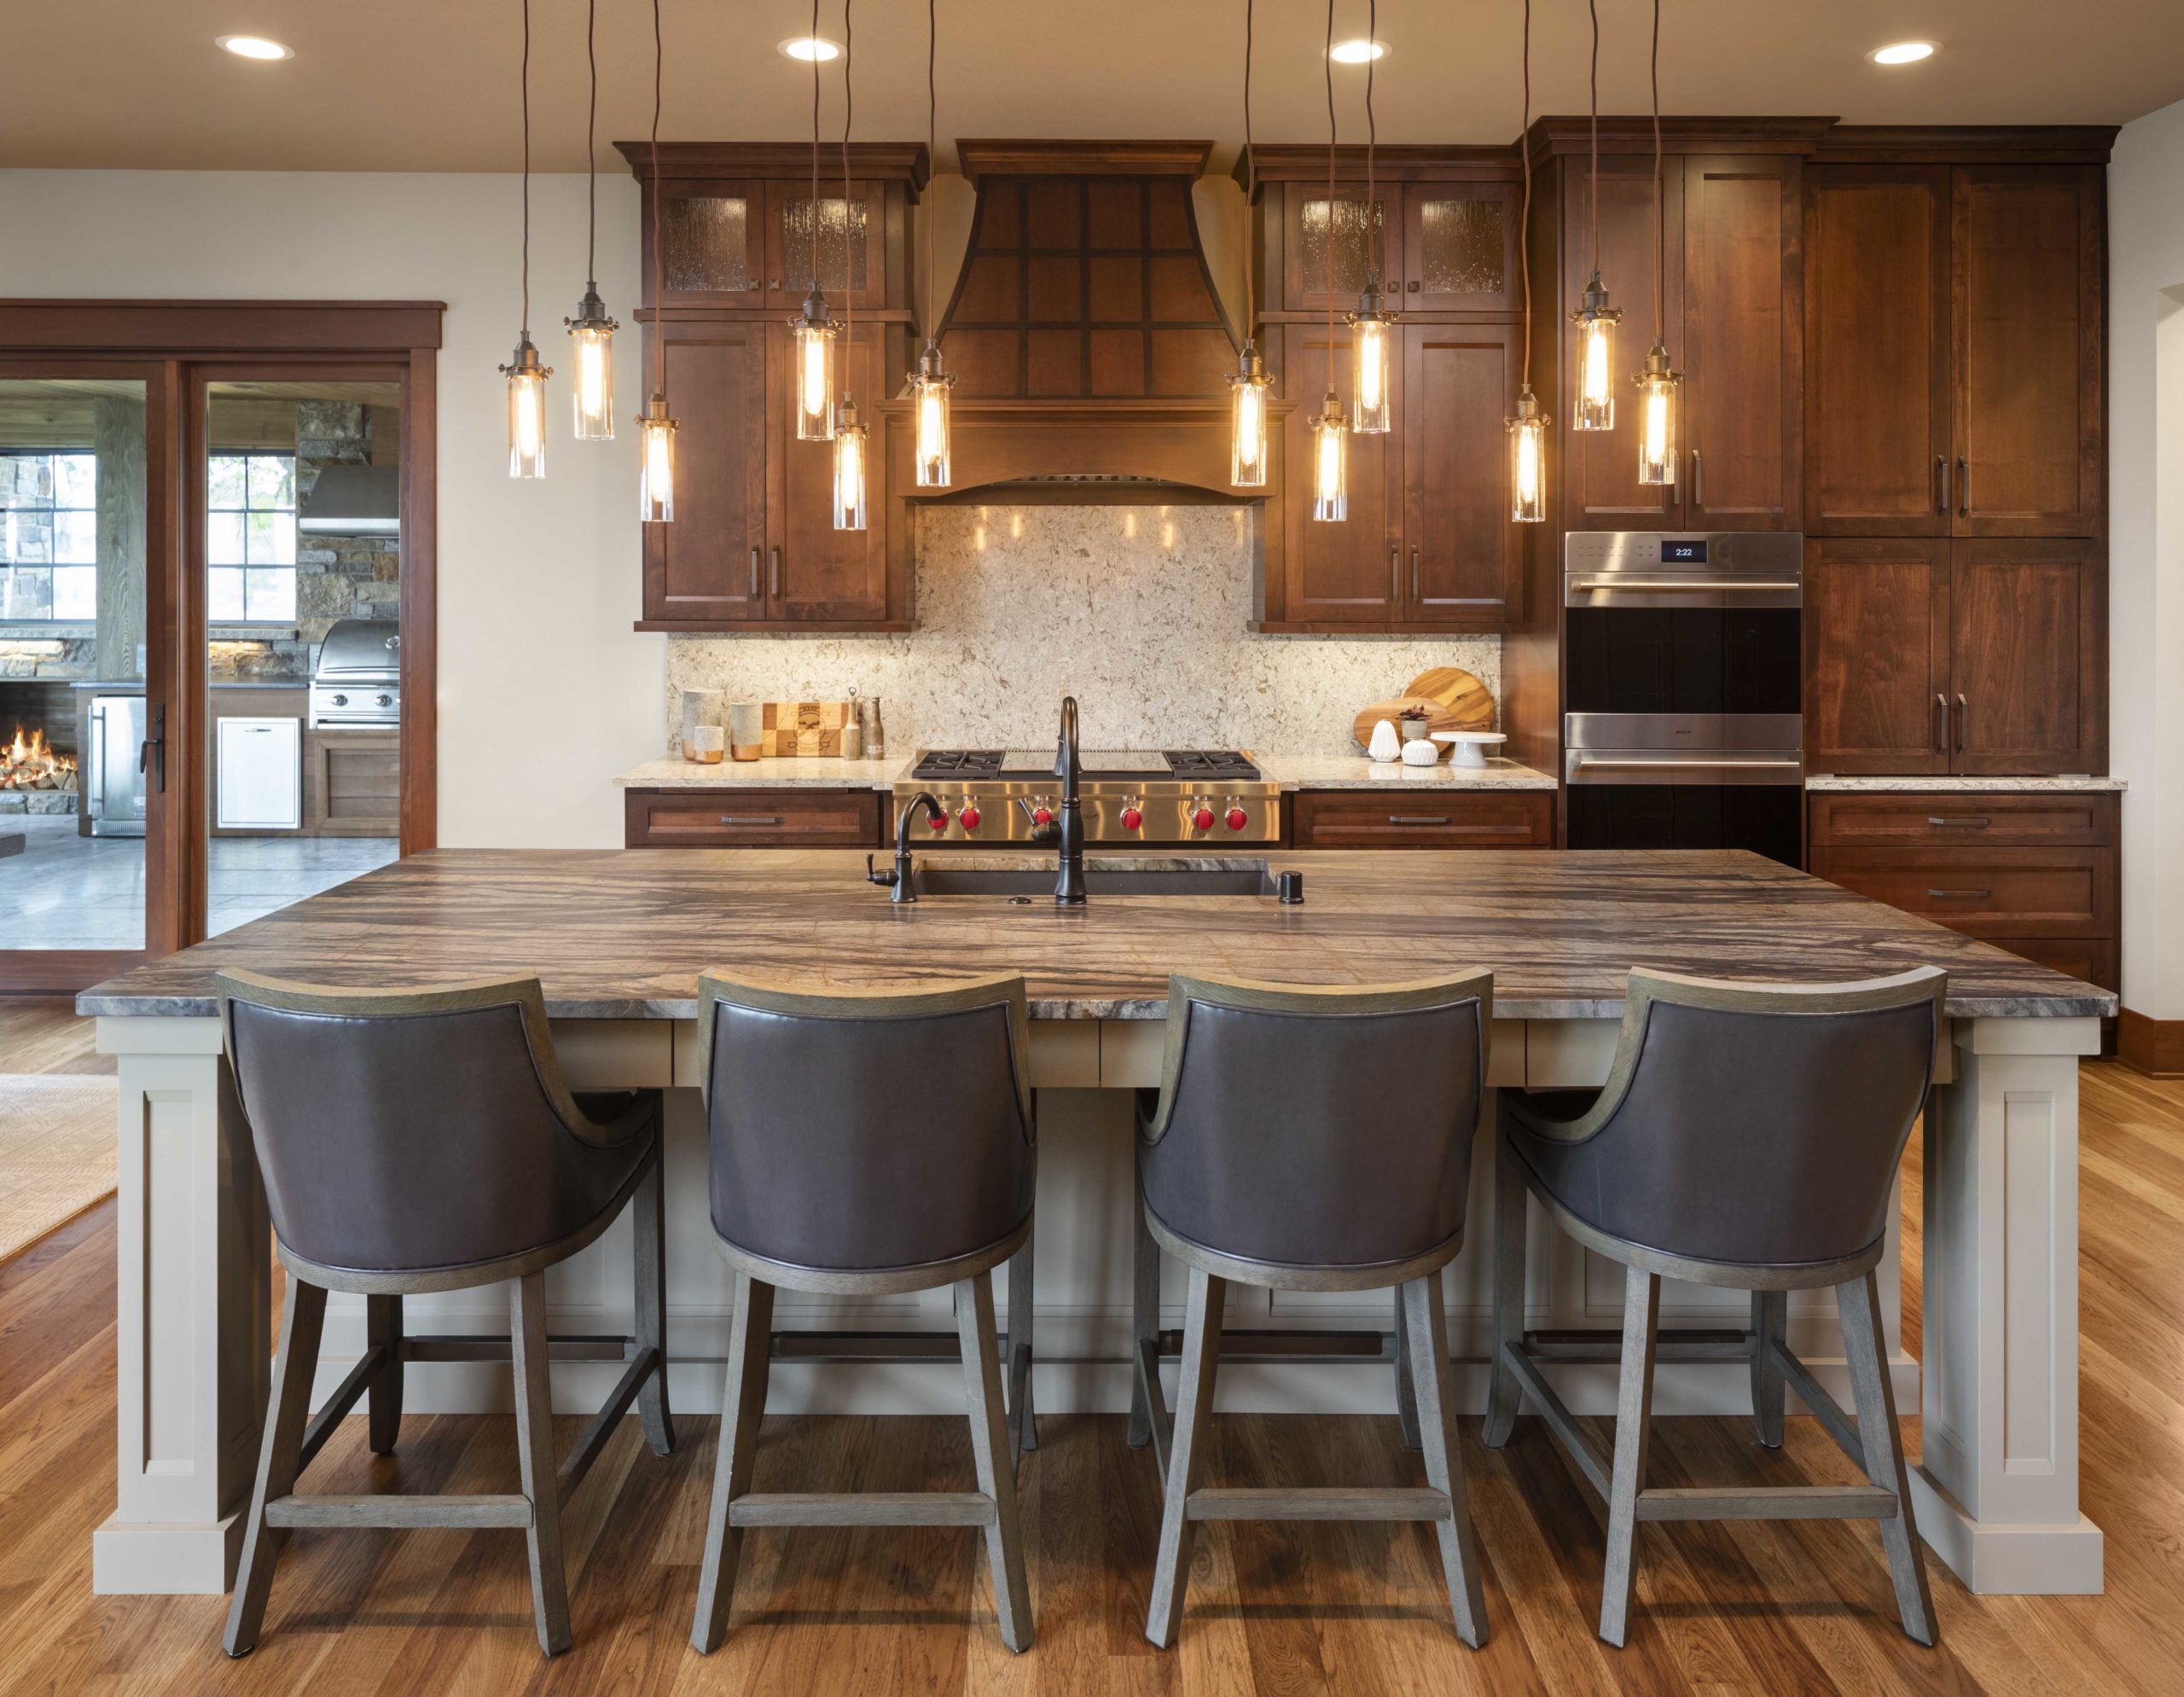 A custom home remodel featuring a kitchen with a center island and bar stools.